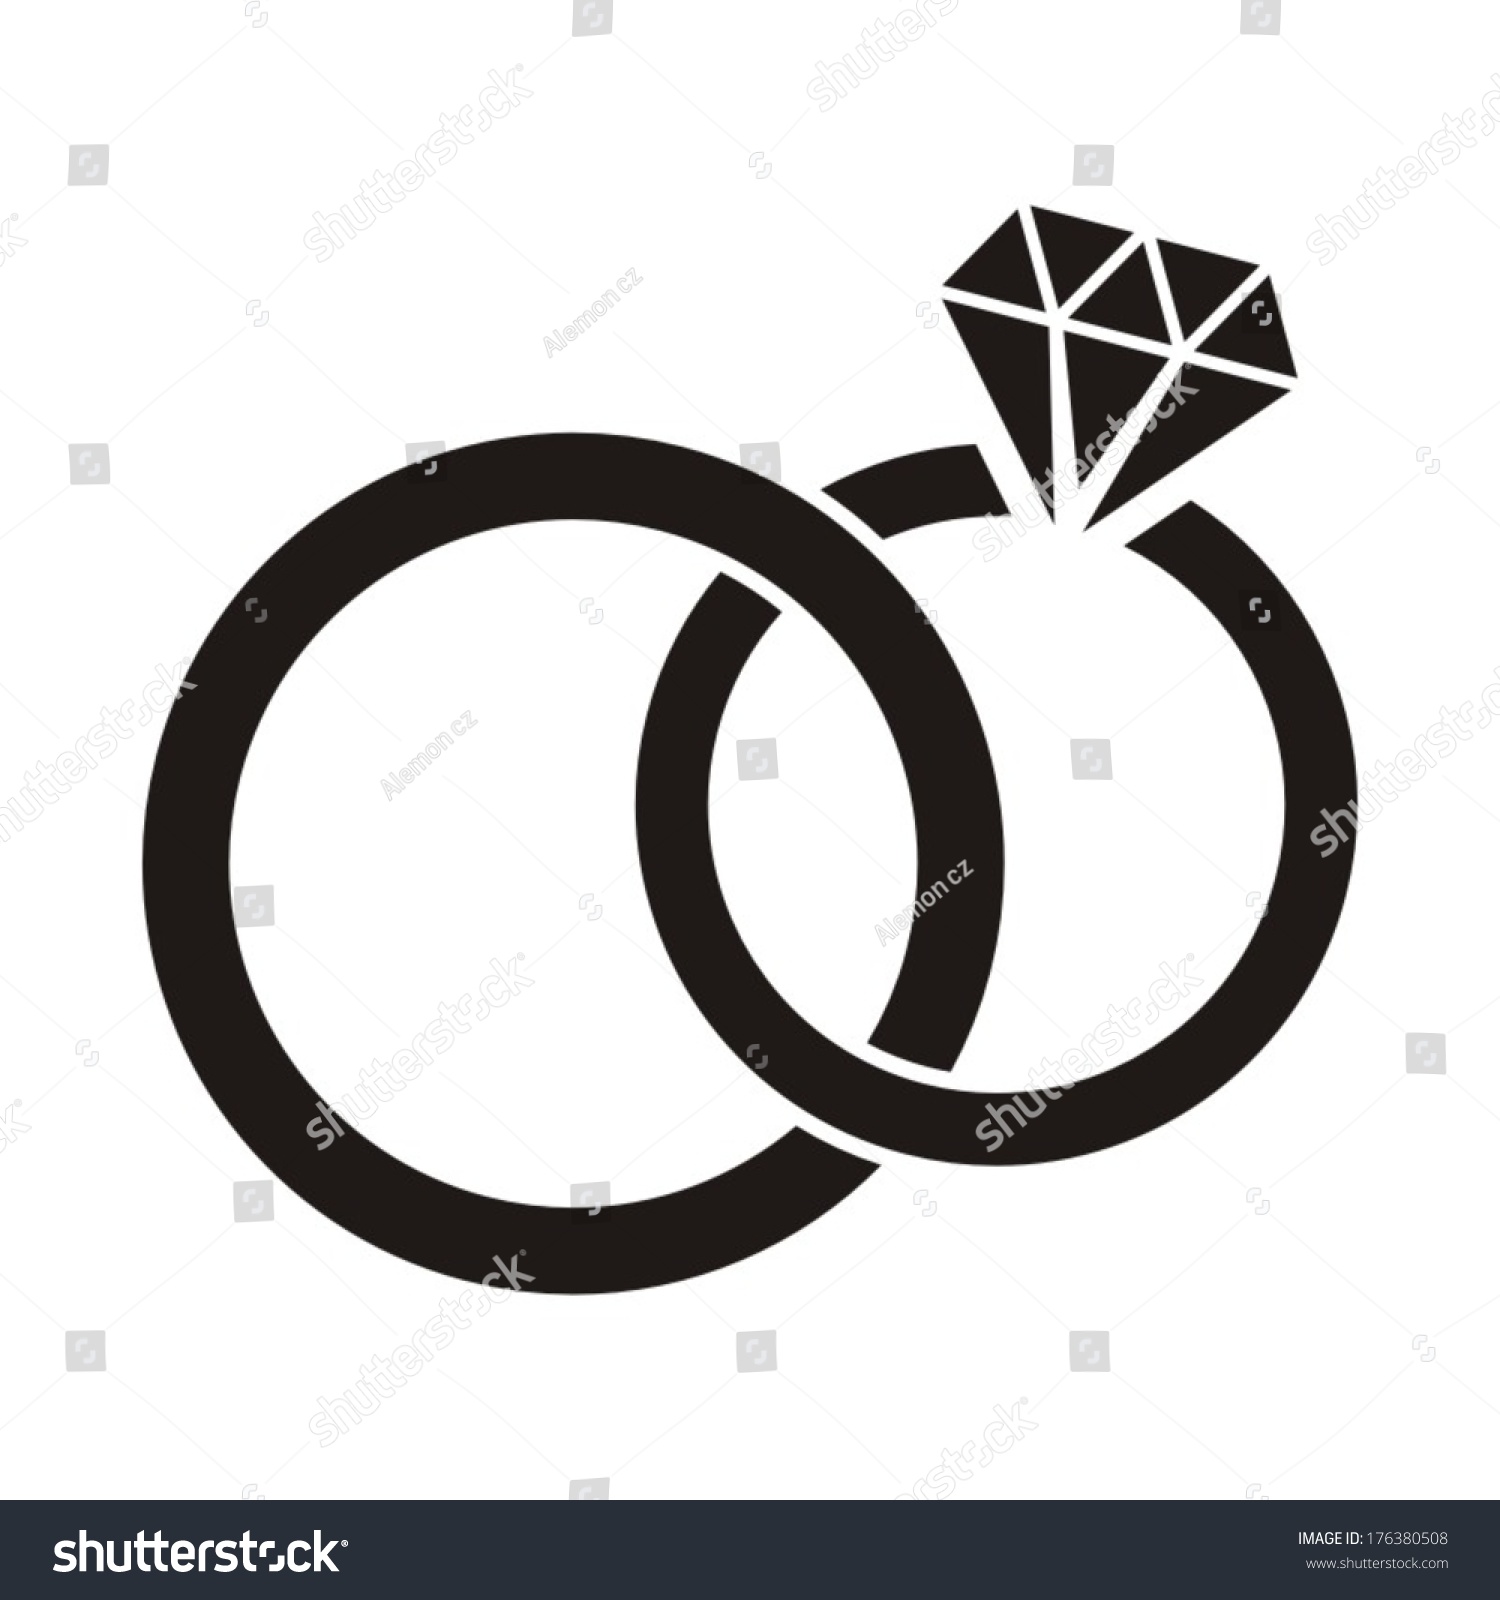 Vector Black Wedding Rings Icon On White Background - 176380508 ...